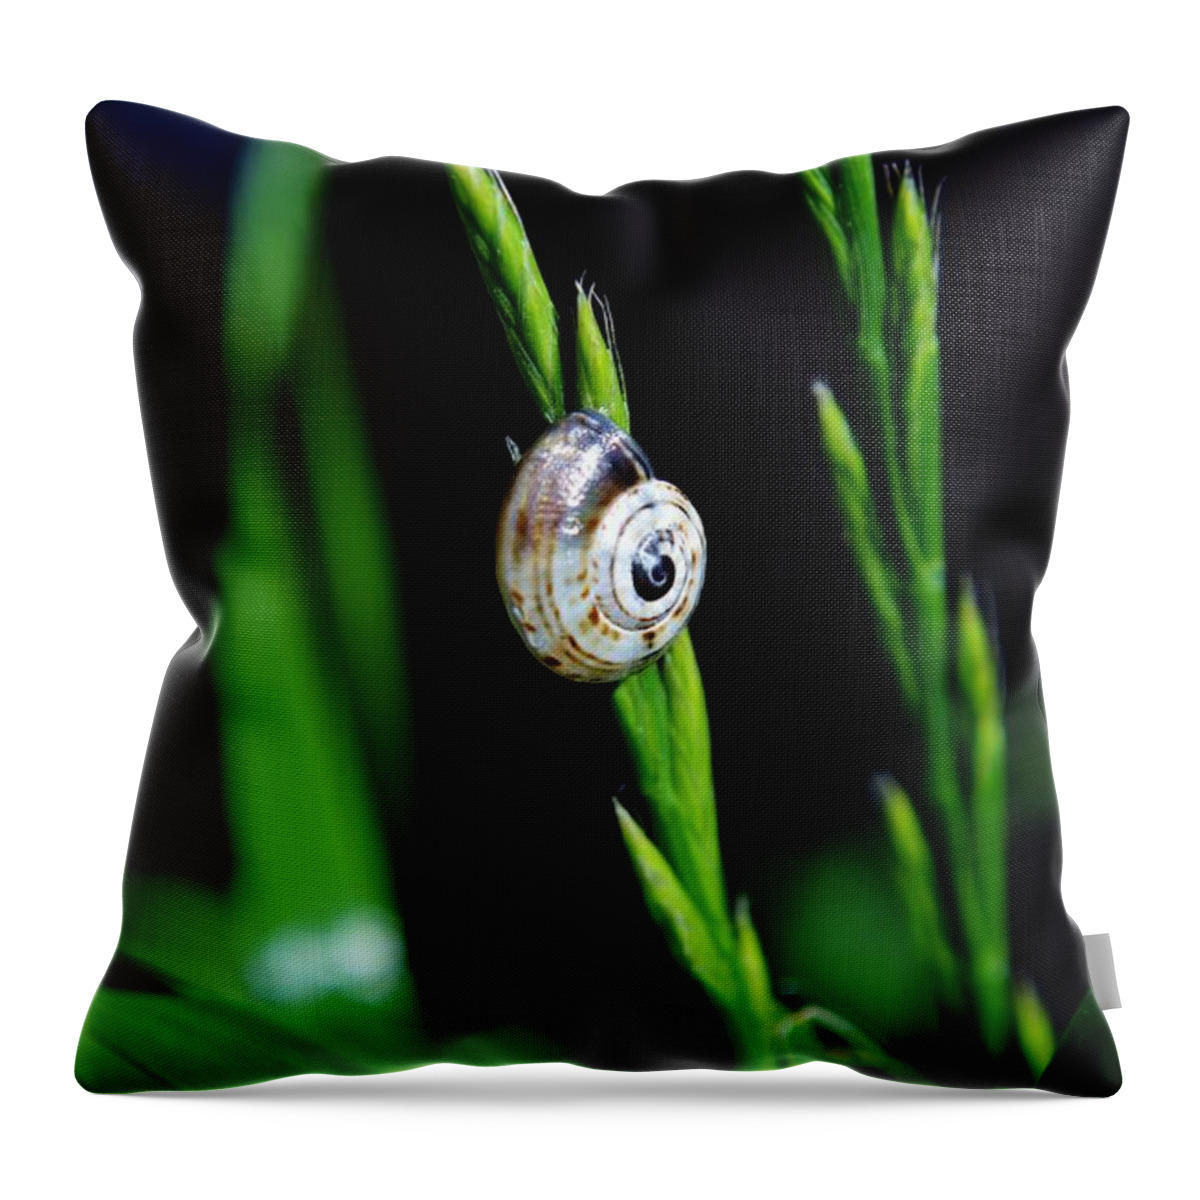 Close Up; Snail; Plant; Garden; Green; Brown; Beige; Nature; Gastropod; Invertebrate; Background; House; Spiral; Grass; Blooming; Blade; Throw Pillow featuring the photograph Snail On Green Grass by Werner Lehmann